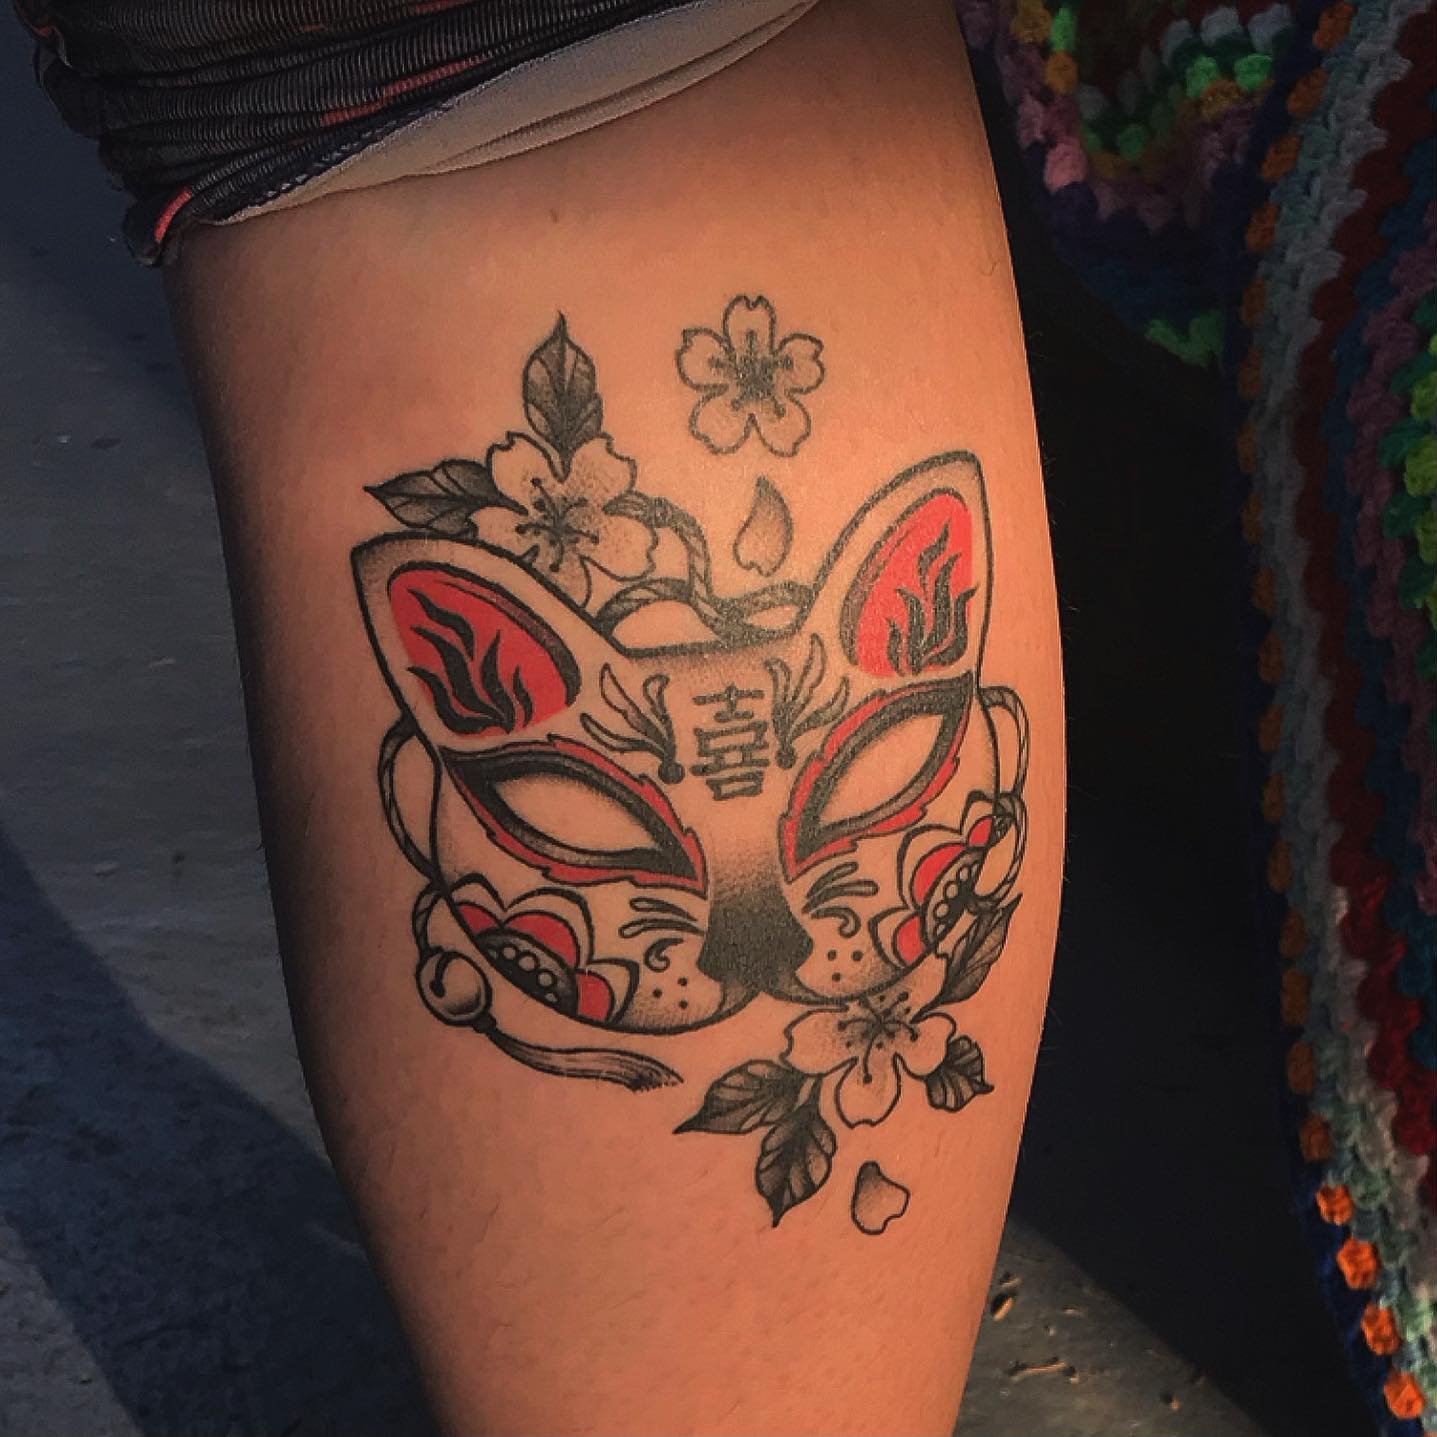 Healed on @vmegan55 &hearts;️
Made at @mans_ruin_tattoo, contact me or the shop for bookings ✉️

#healedtattoo #kitsune #dynamicink #melbournetattoo #japanesetattoo #melbourneart #calftattoo #bishoprotary